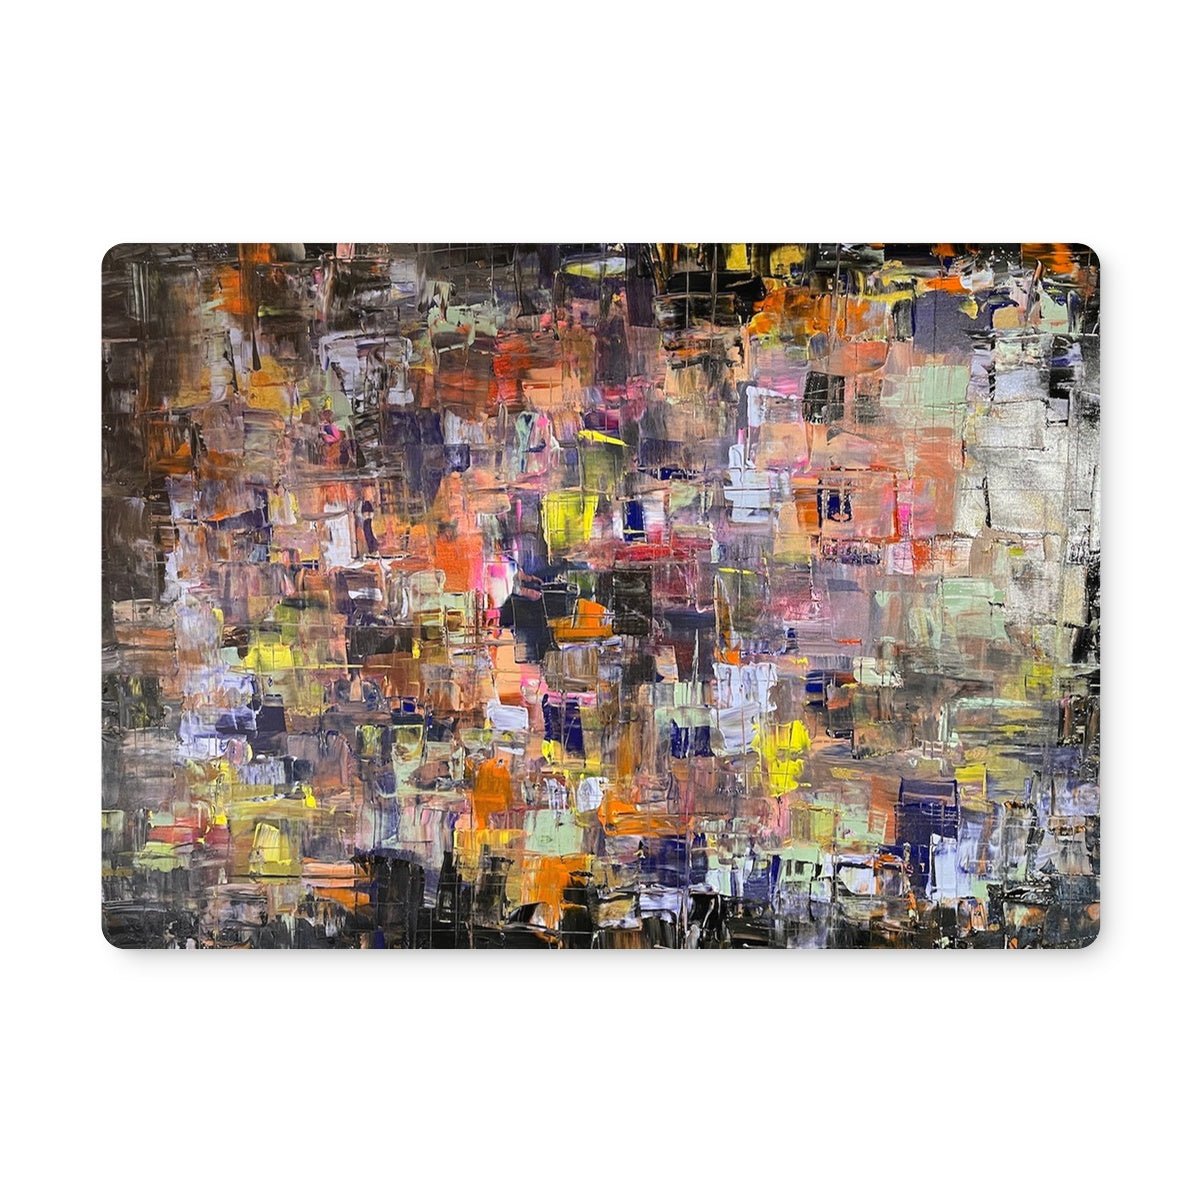 Never Enough Art Gifts Placemat-Placemats-Abstract & Impressionistic Art Gallery-6 Placemats-Paintings, Prints, Homeware, Art Gifts From Scotland By Scottish Artist Kevin Hunter